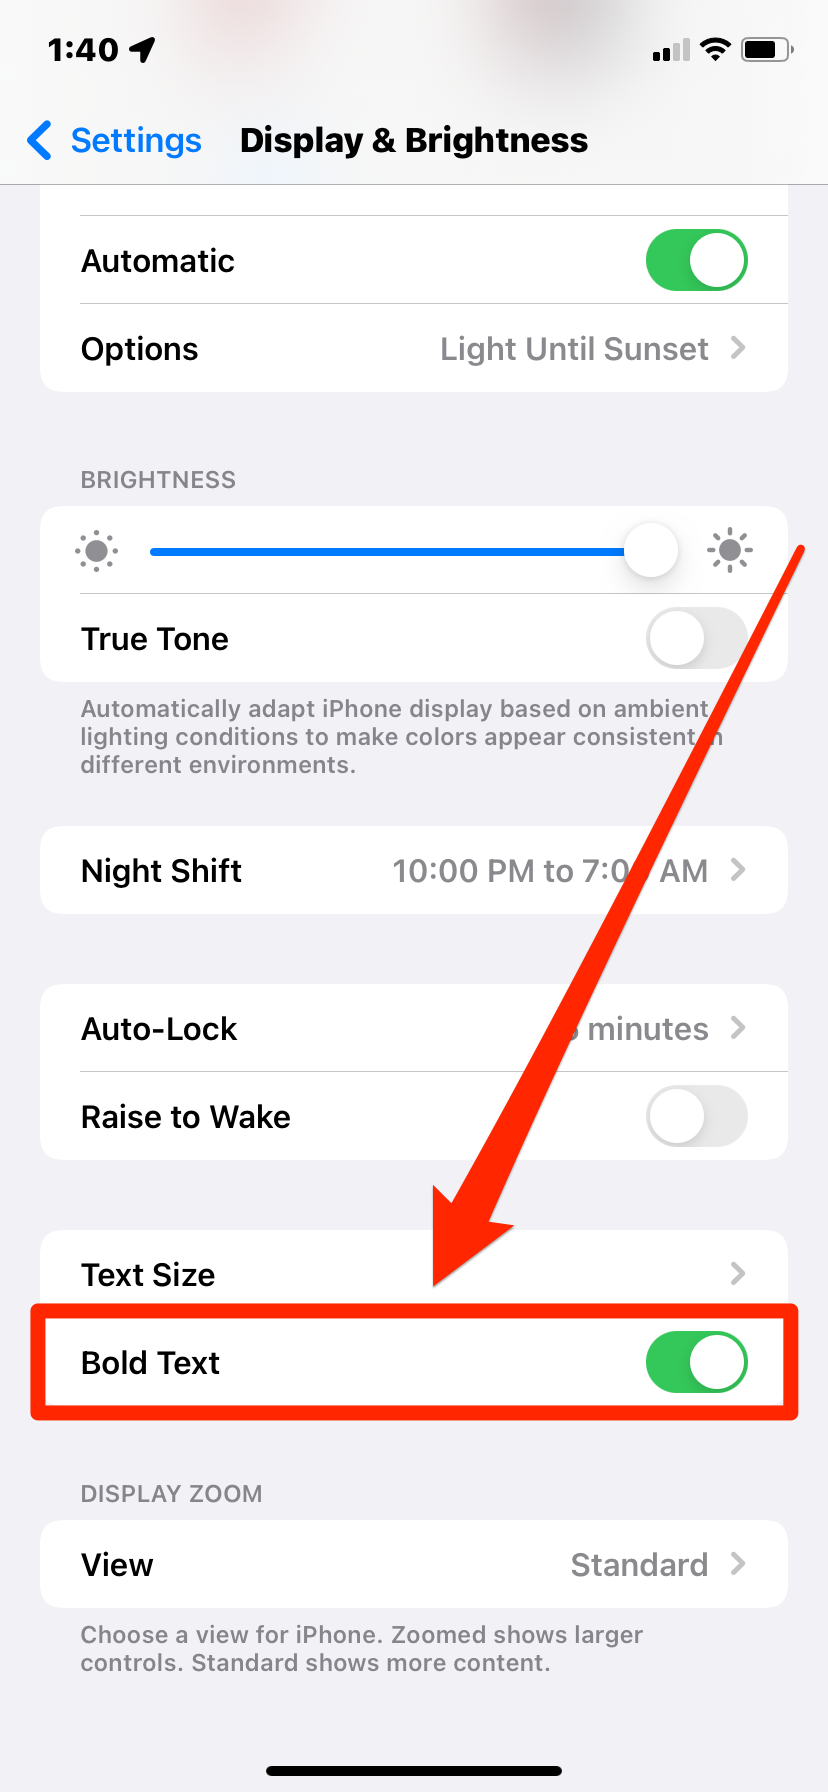 An iPhone's Display & Brightness page. The text is all bold, and the Bold Text option is highlighted.